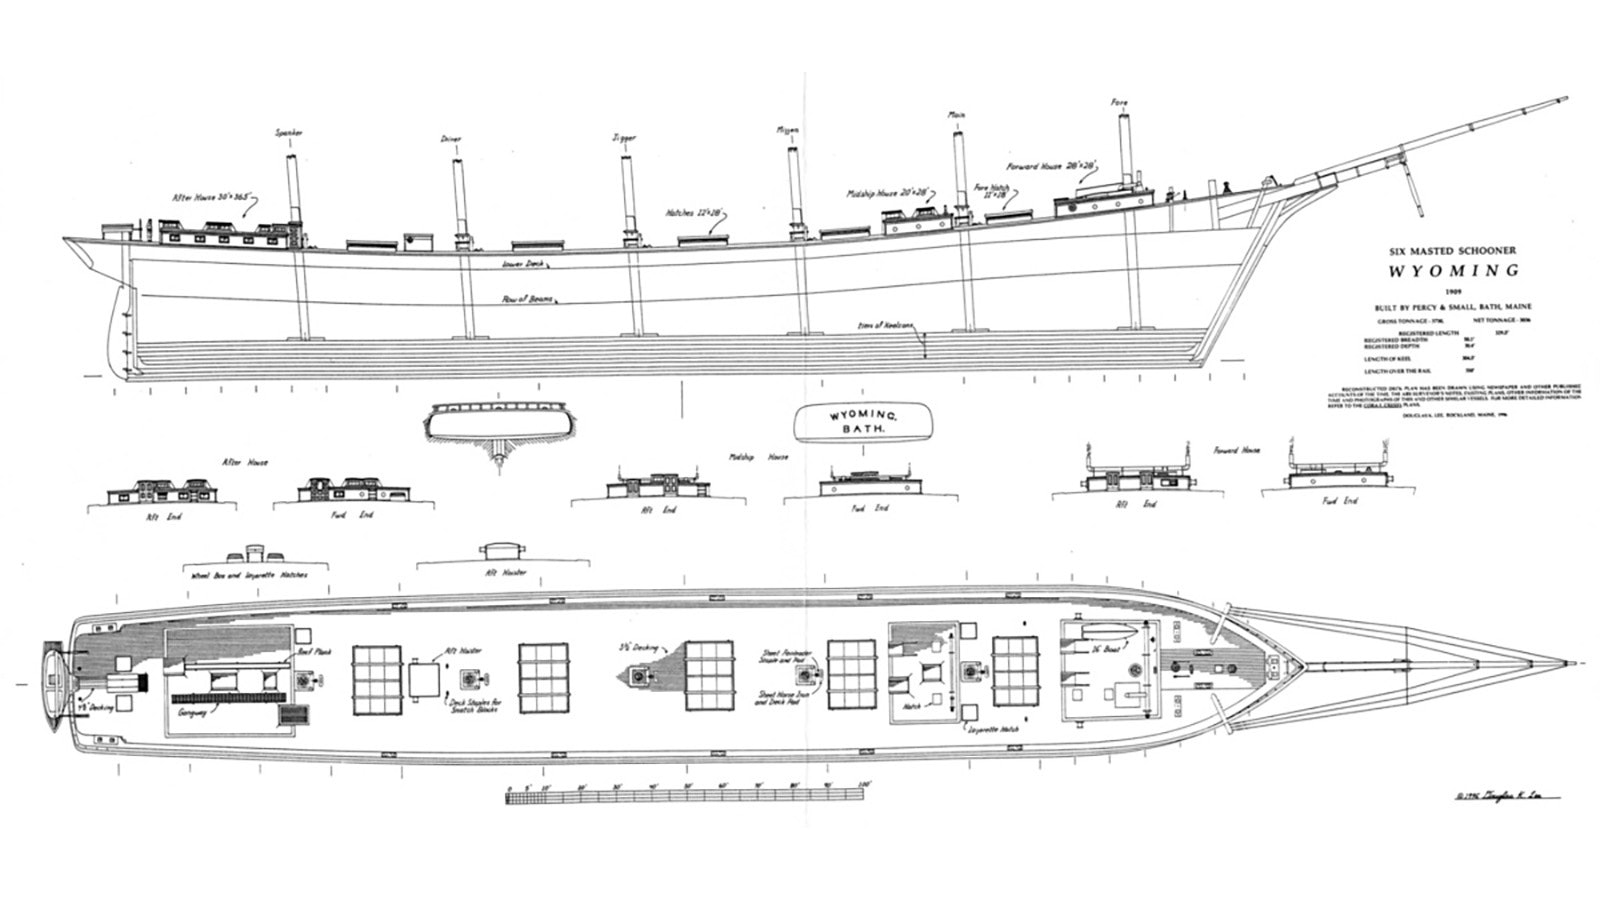 A pair of drawings by Doug Lee depict the layout plan and profile of the Wyoming schooner.